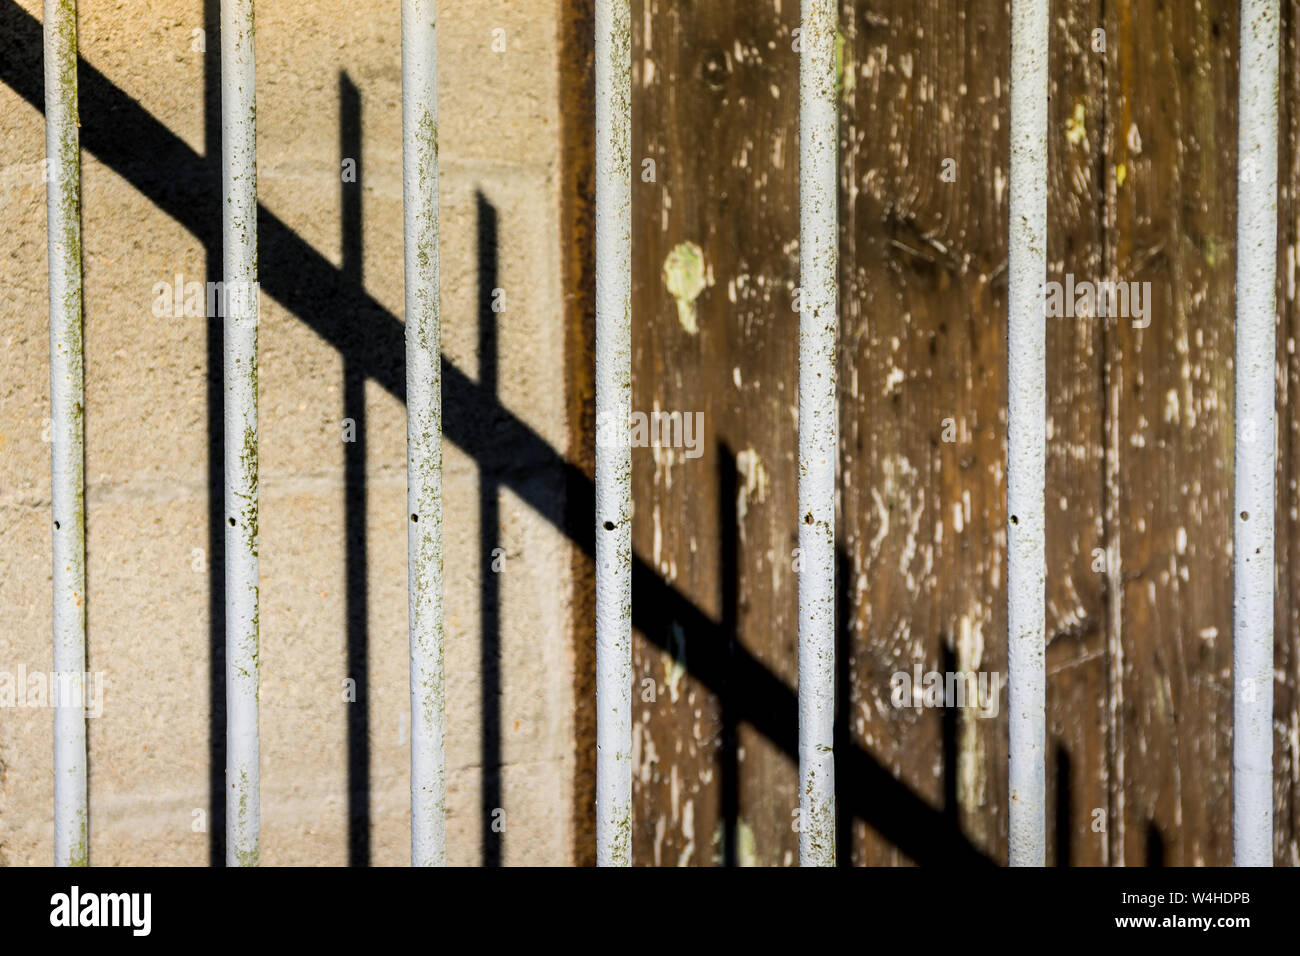 Old painted railings and corrugated wall with abstract shadows. Stock Photo